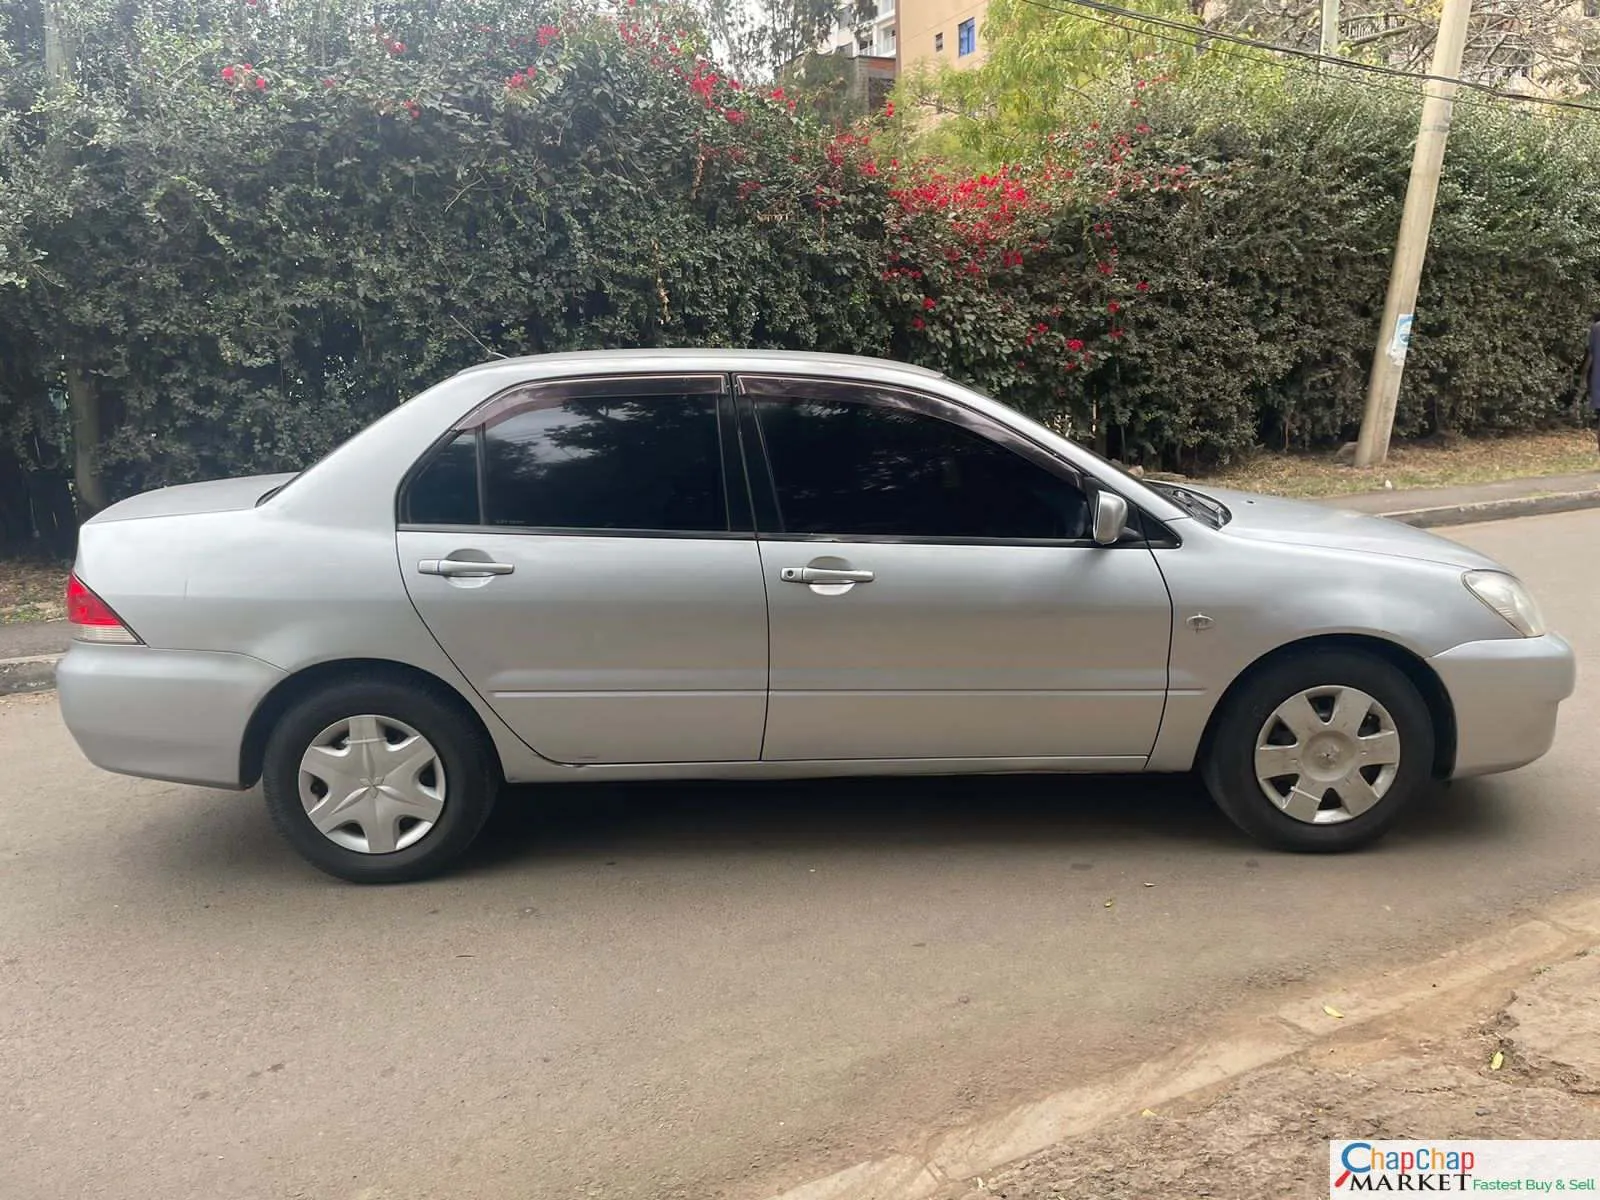 Cars Cars For Sale-Mitsubishi Lancer You Pay 30% Deposit installments Trade in Ok EXCLUSIVE lancer for sale in kenya hire purchase installments 9